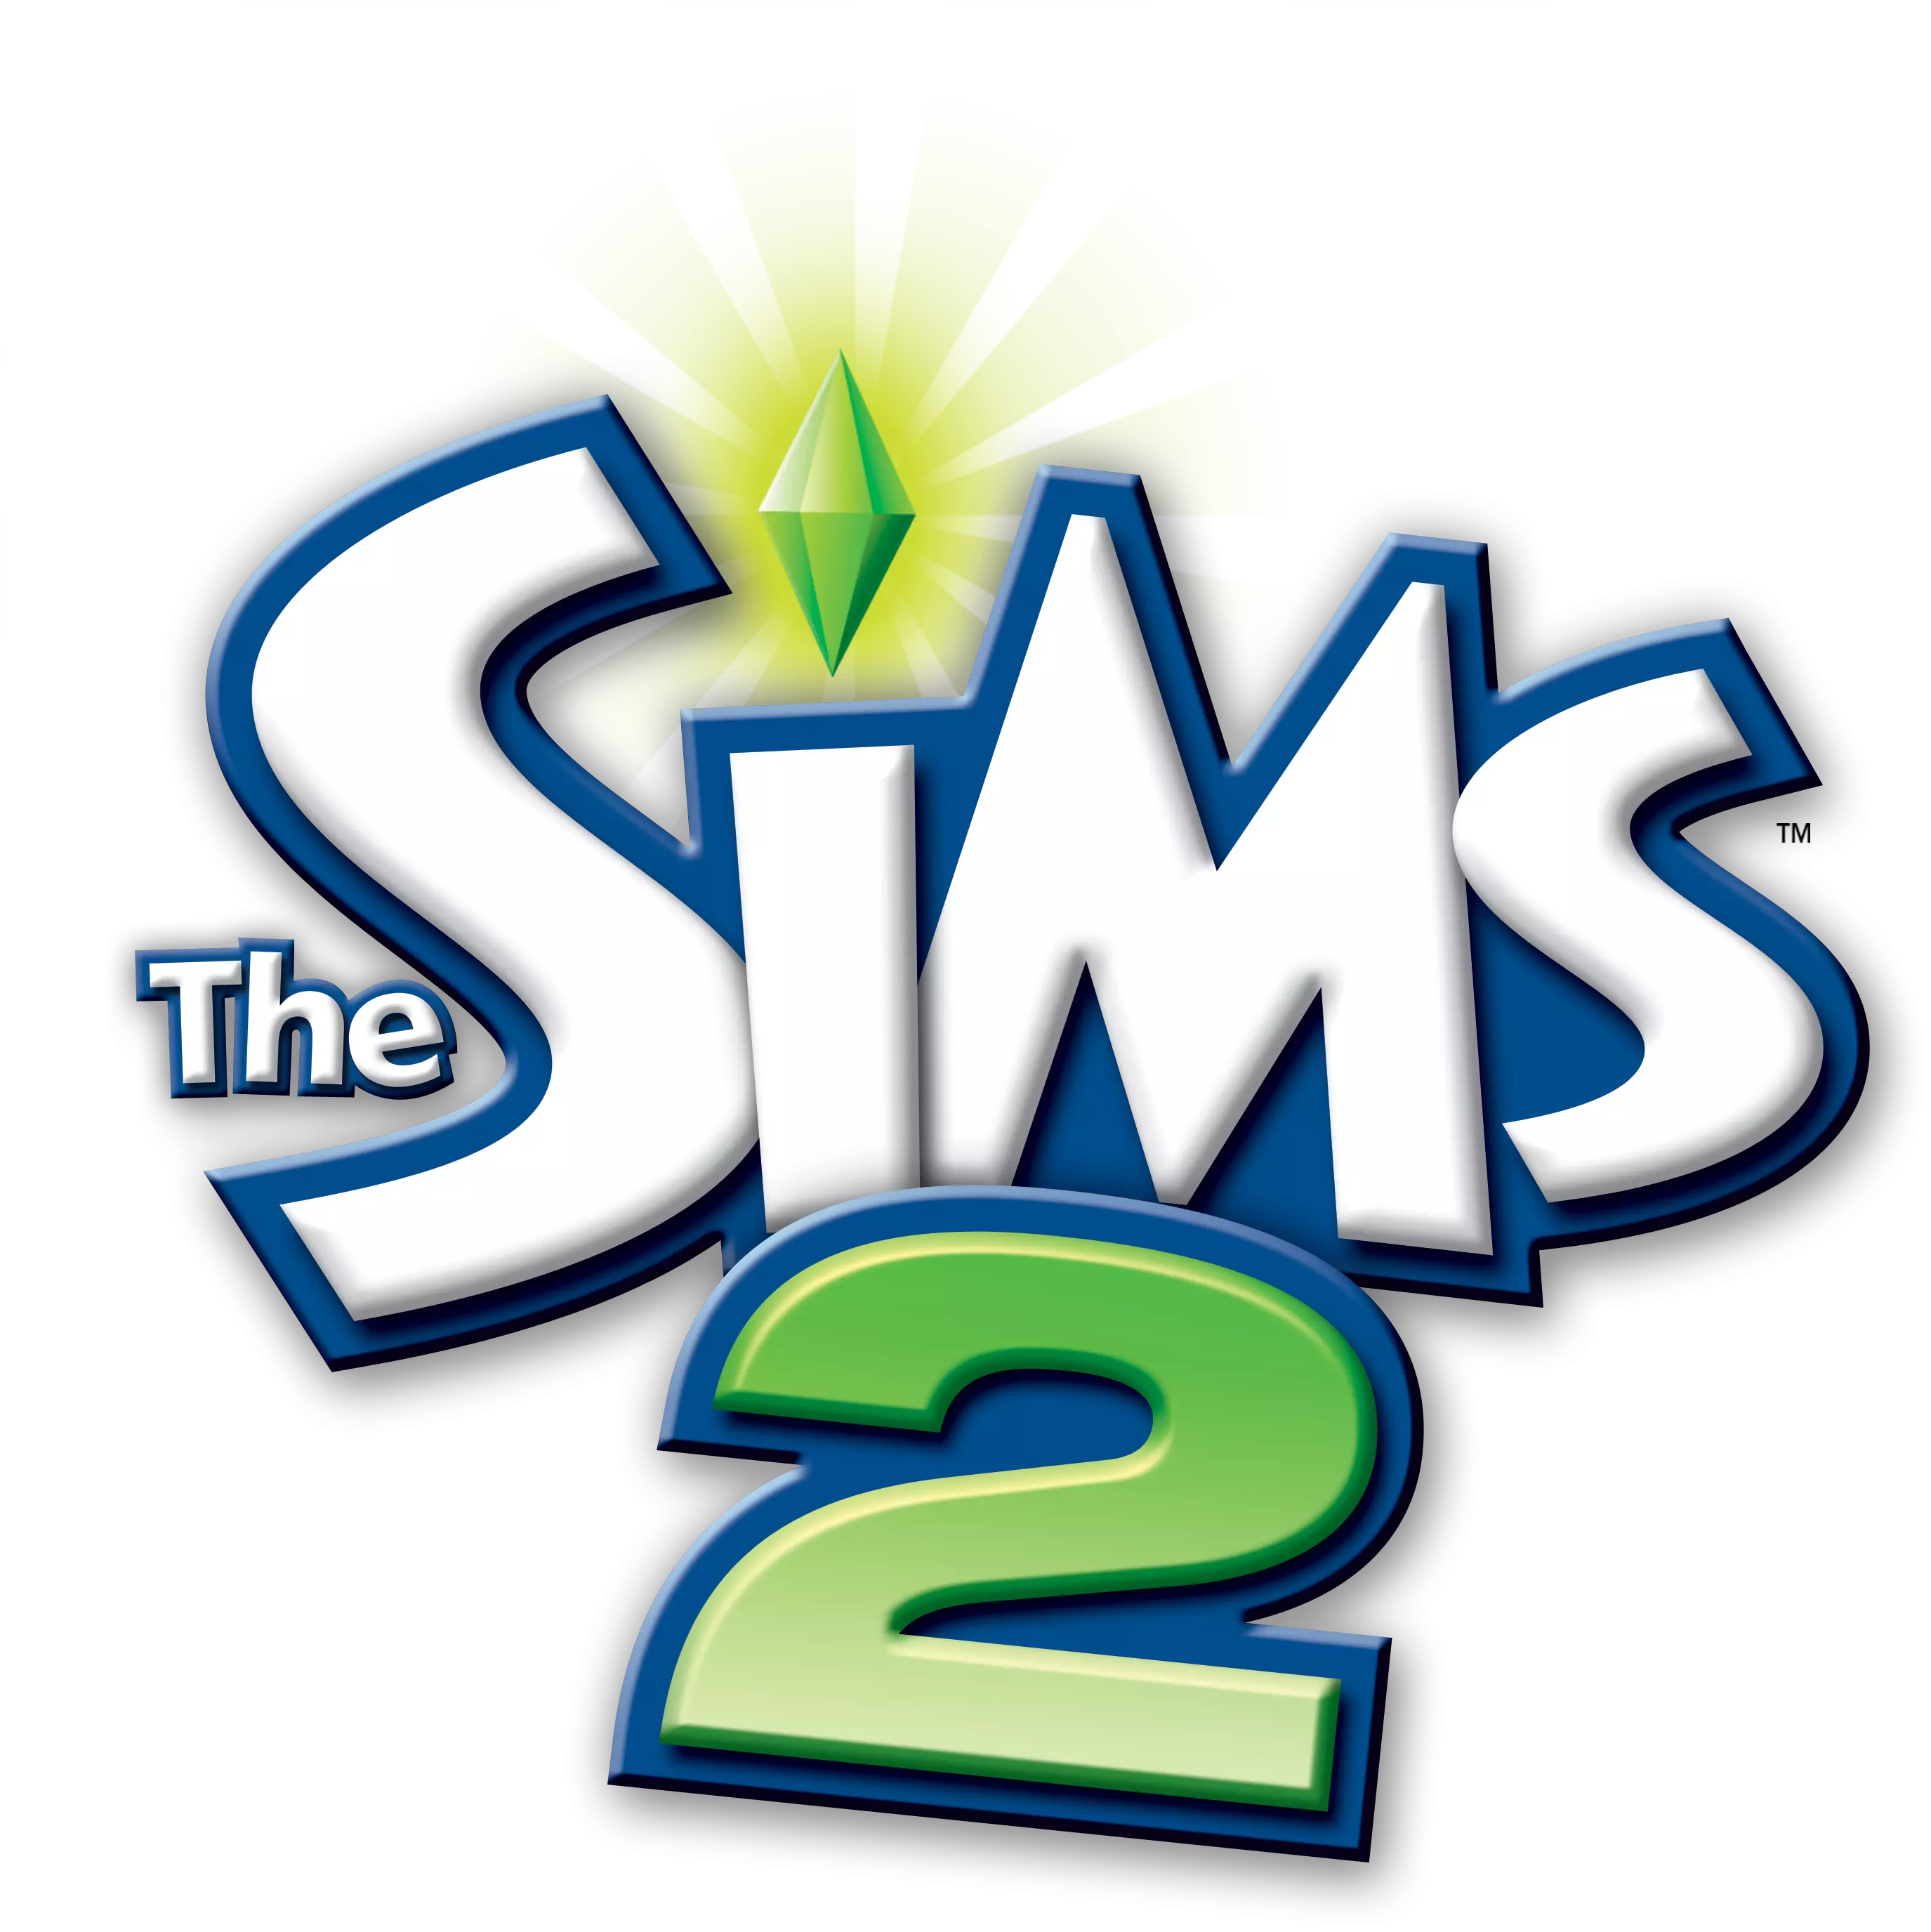 The Sims series